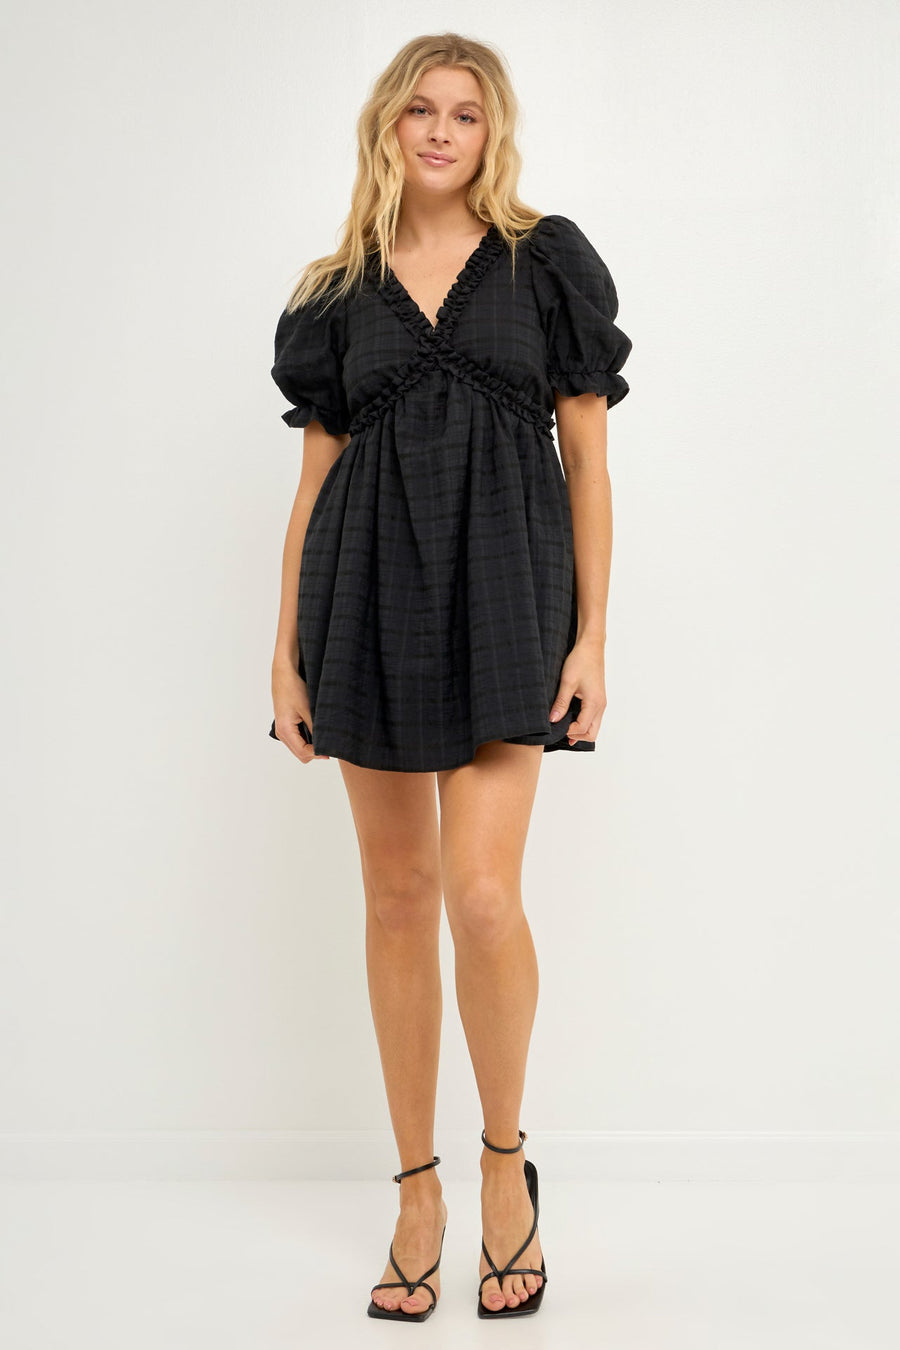 FREE THE ROSES-Double Ruffled Band Mini Puff Sleeve Dress-DRESSES available at Objectrare